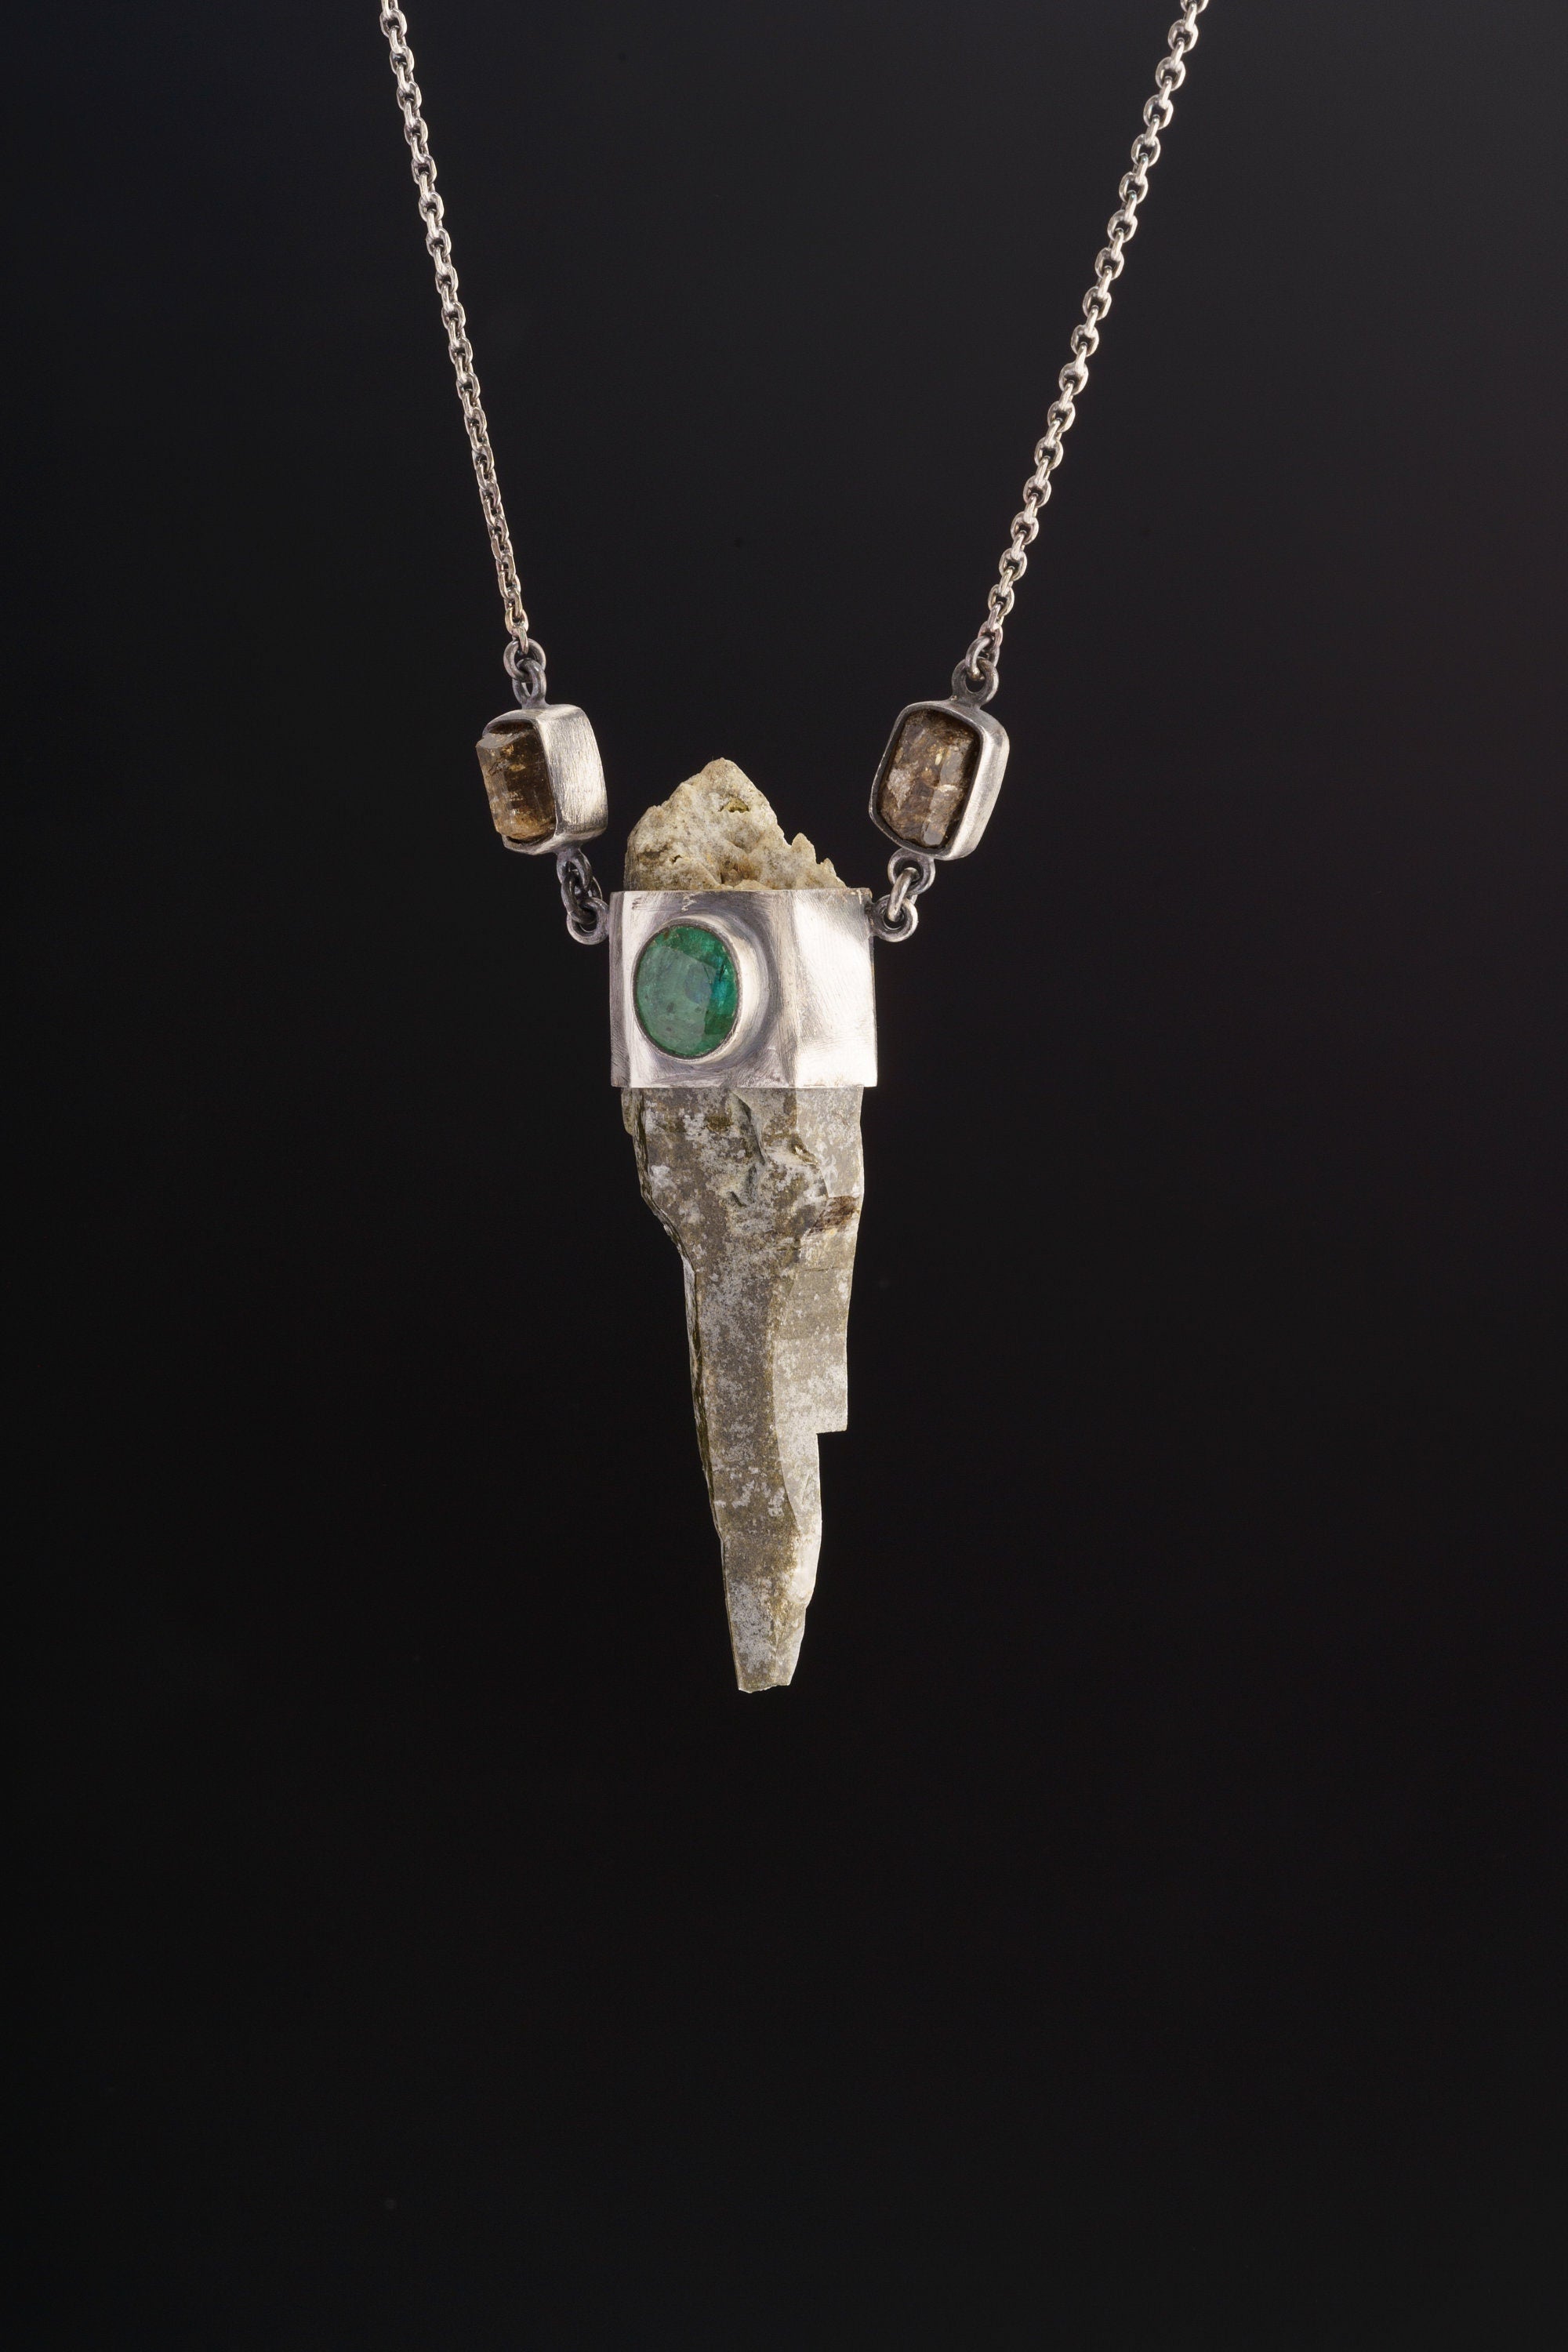 Himalayan Harmony Faceted Emerald, Dravite Tourmaline & Skeletal DT Chloride Quartz Pendant in Oxidized Sterling Silver